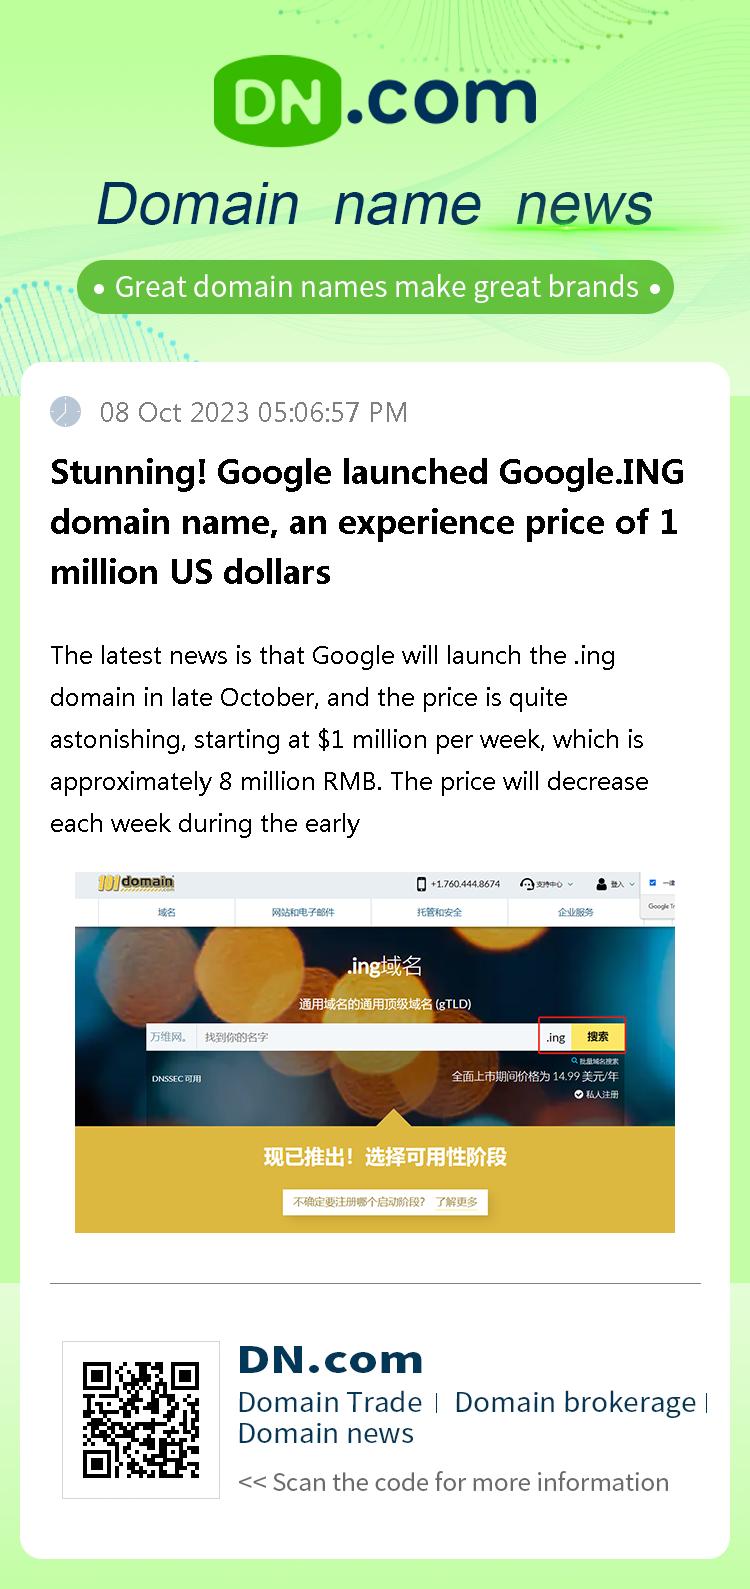 Stunning! Google launched Google.ING domain name, an experience price of 1 million US dollars